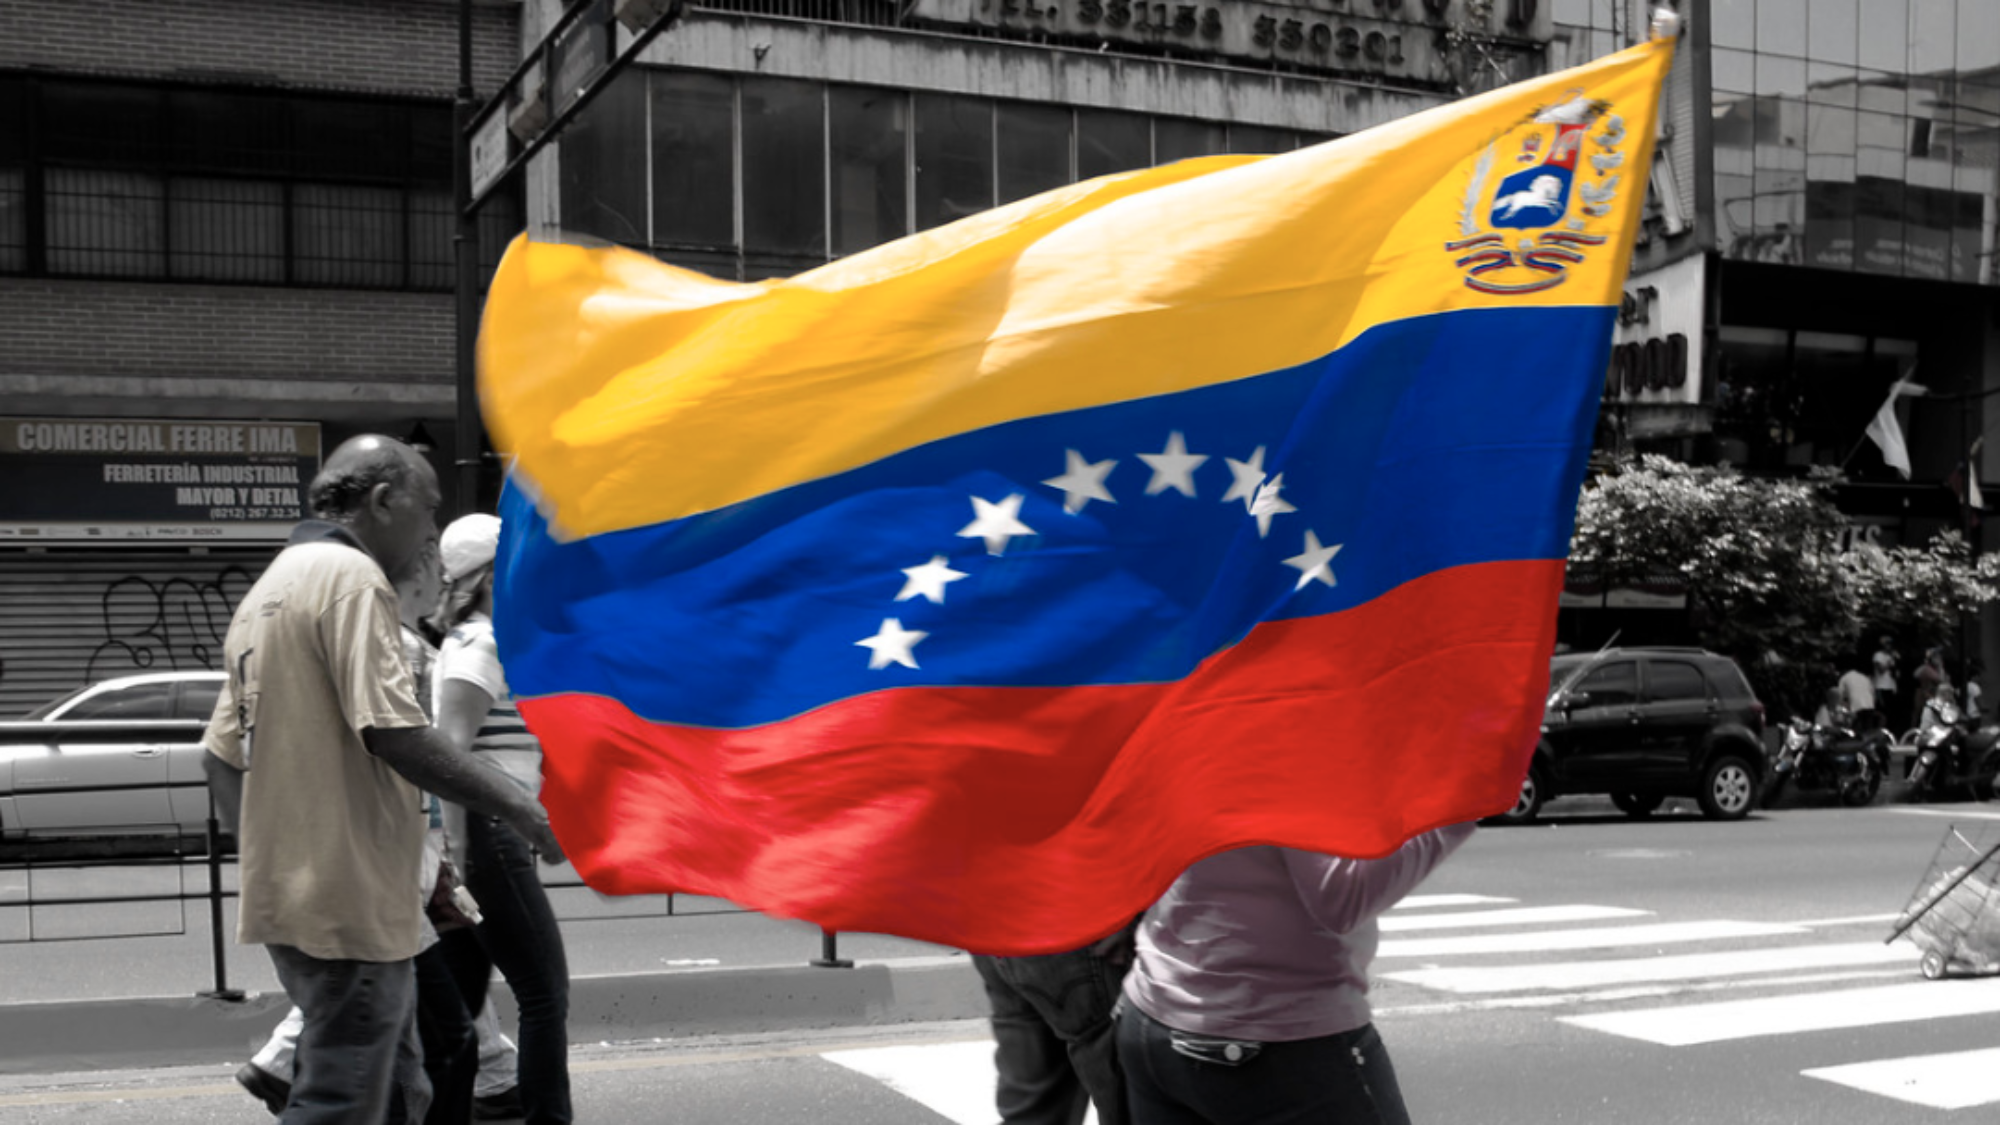 A person walks down the middle of a street carrying the Venezuelan flag.